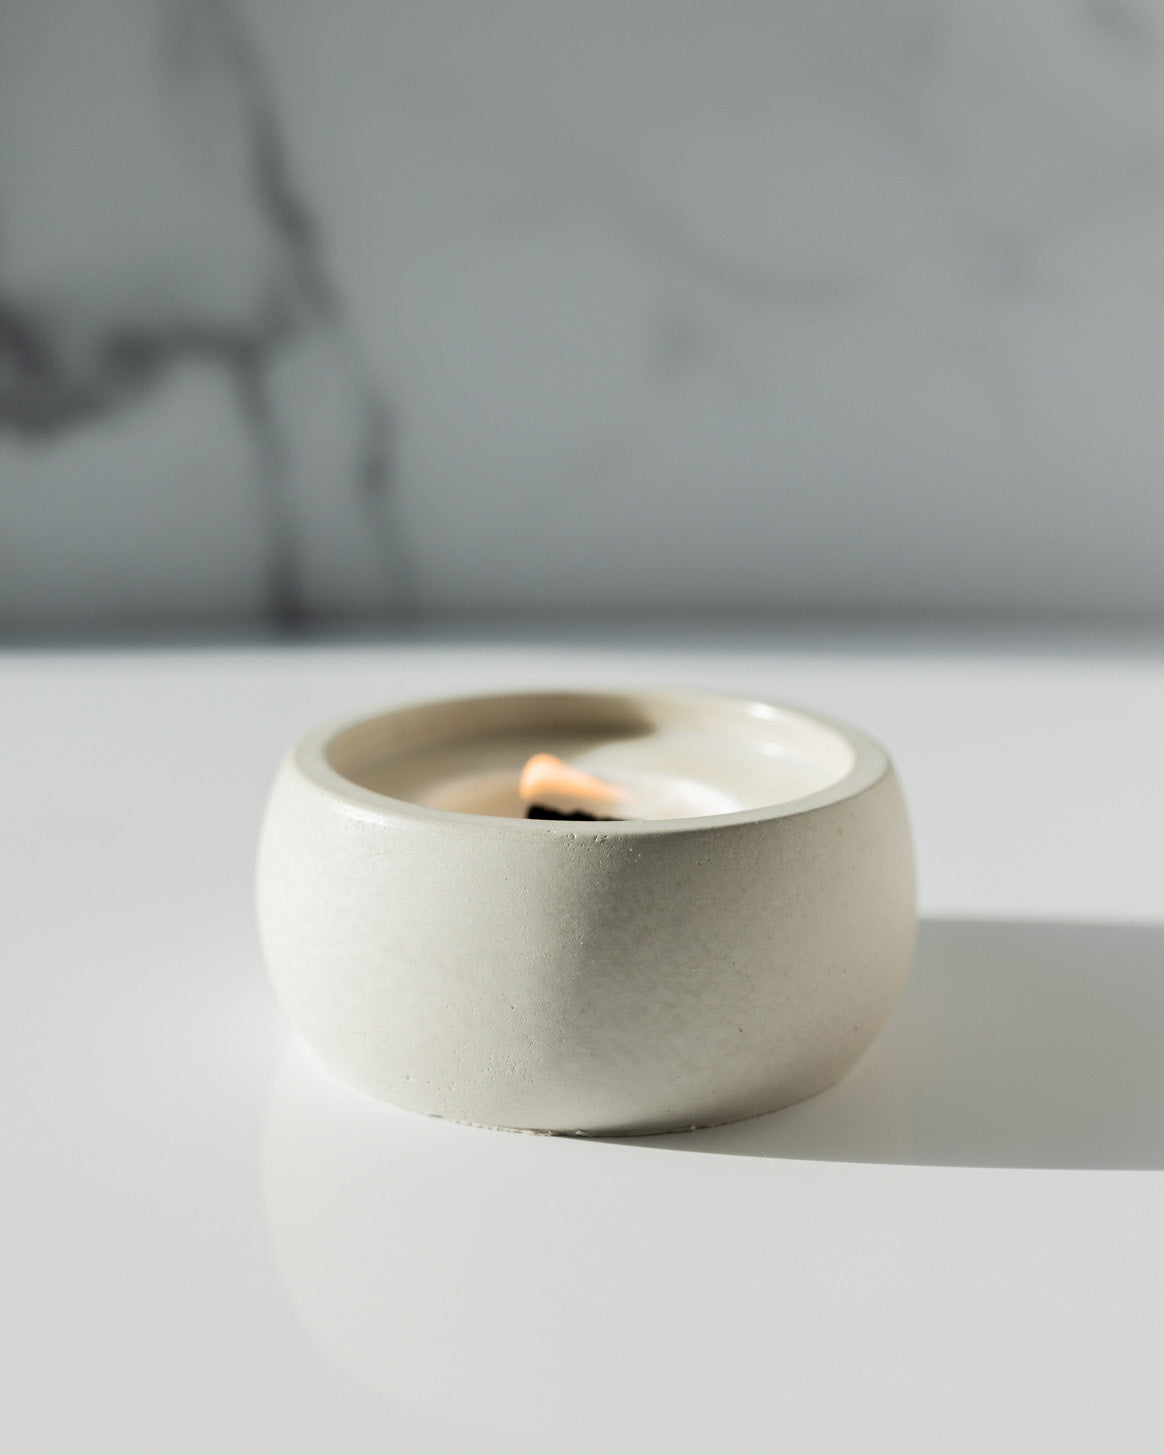 Live By The Sun Coconut Soy Candle - Concrete Wooden Wick Vessel